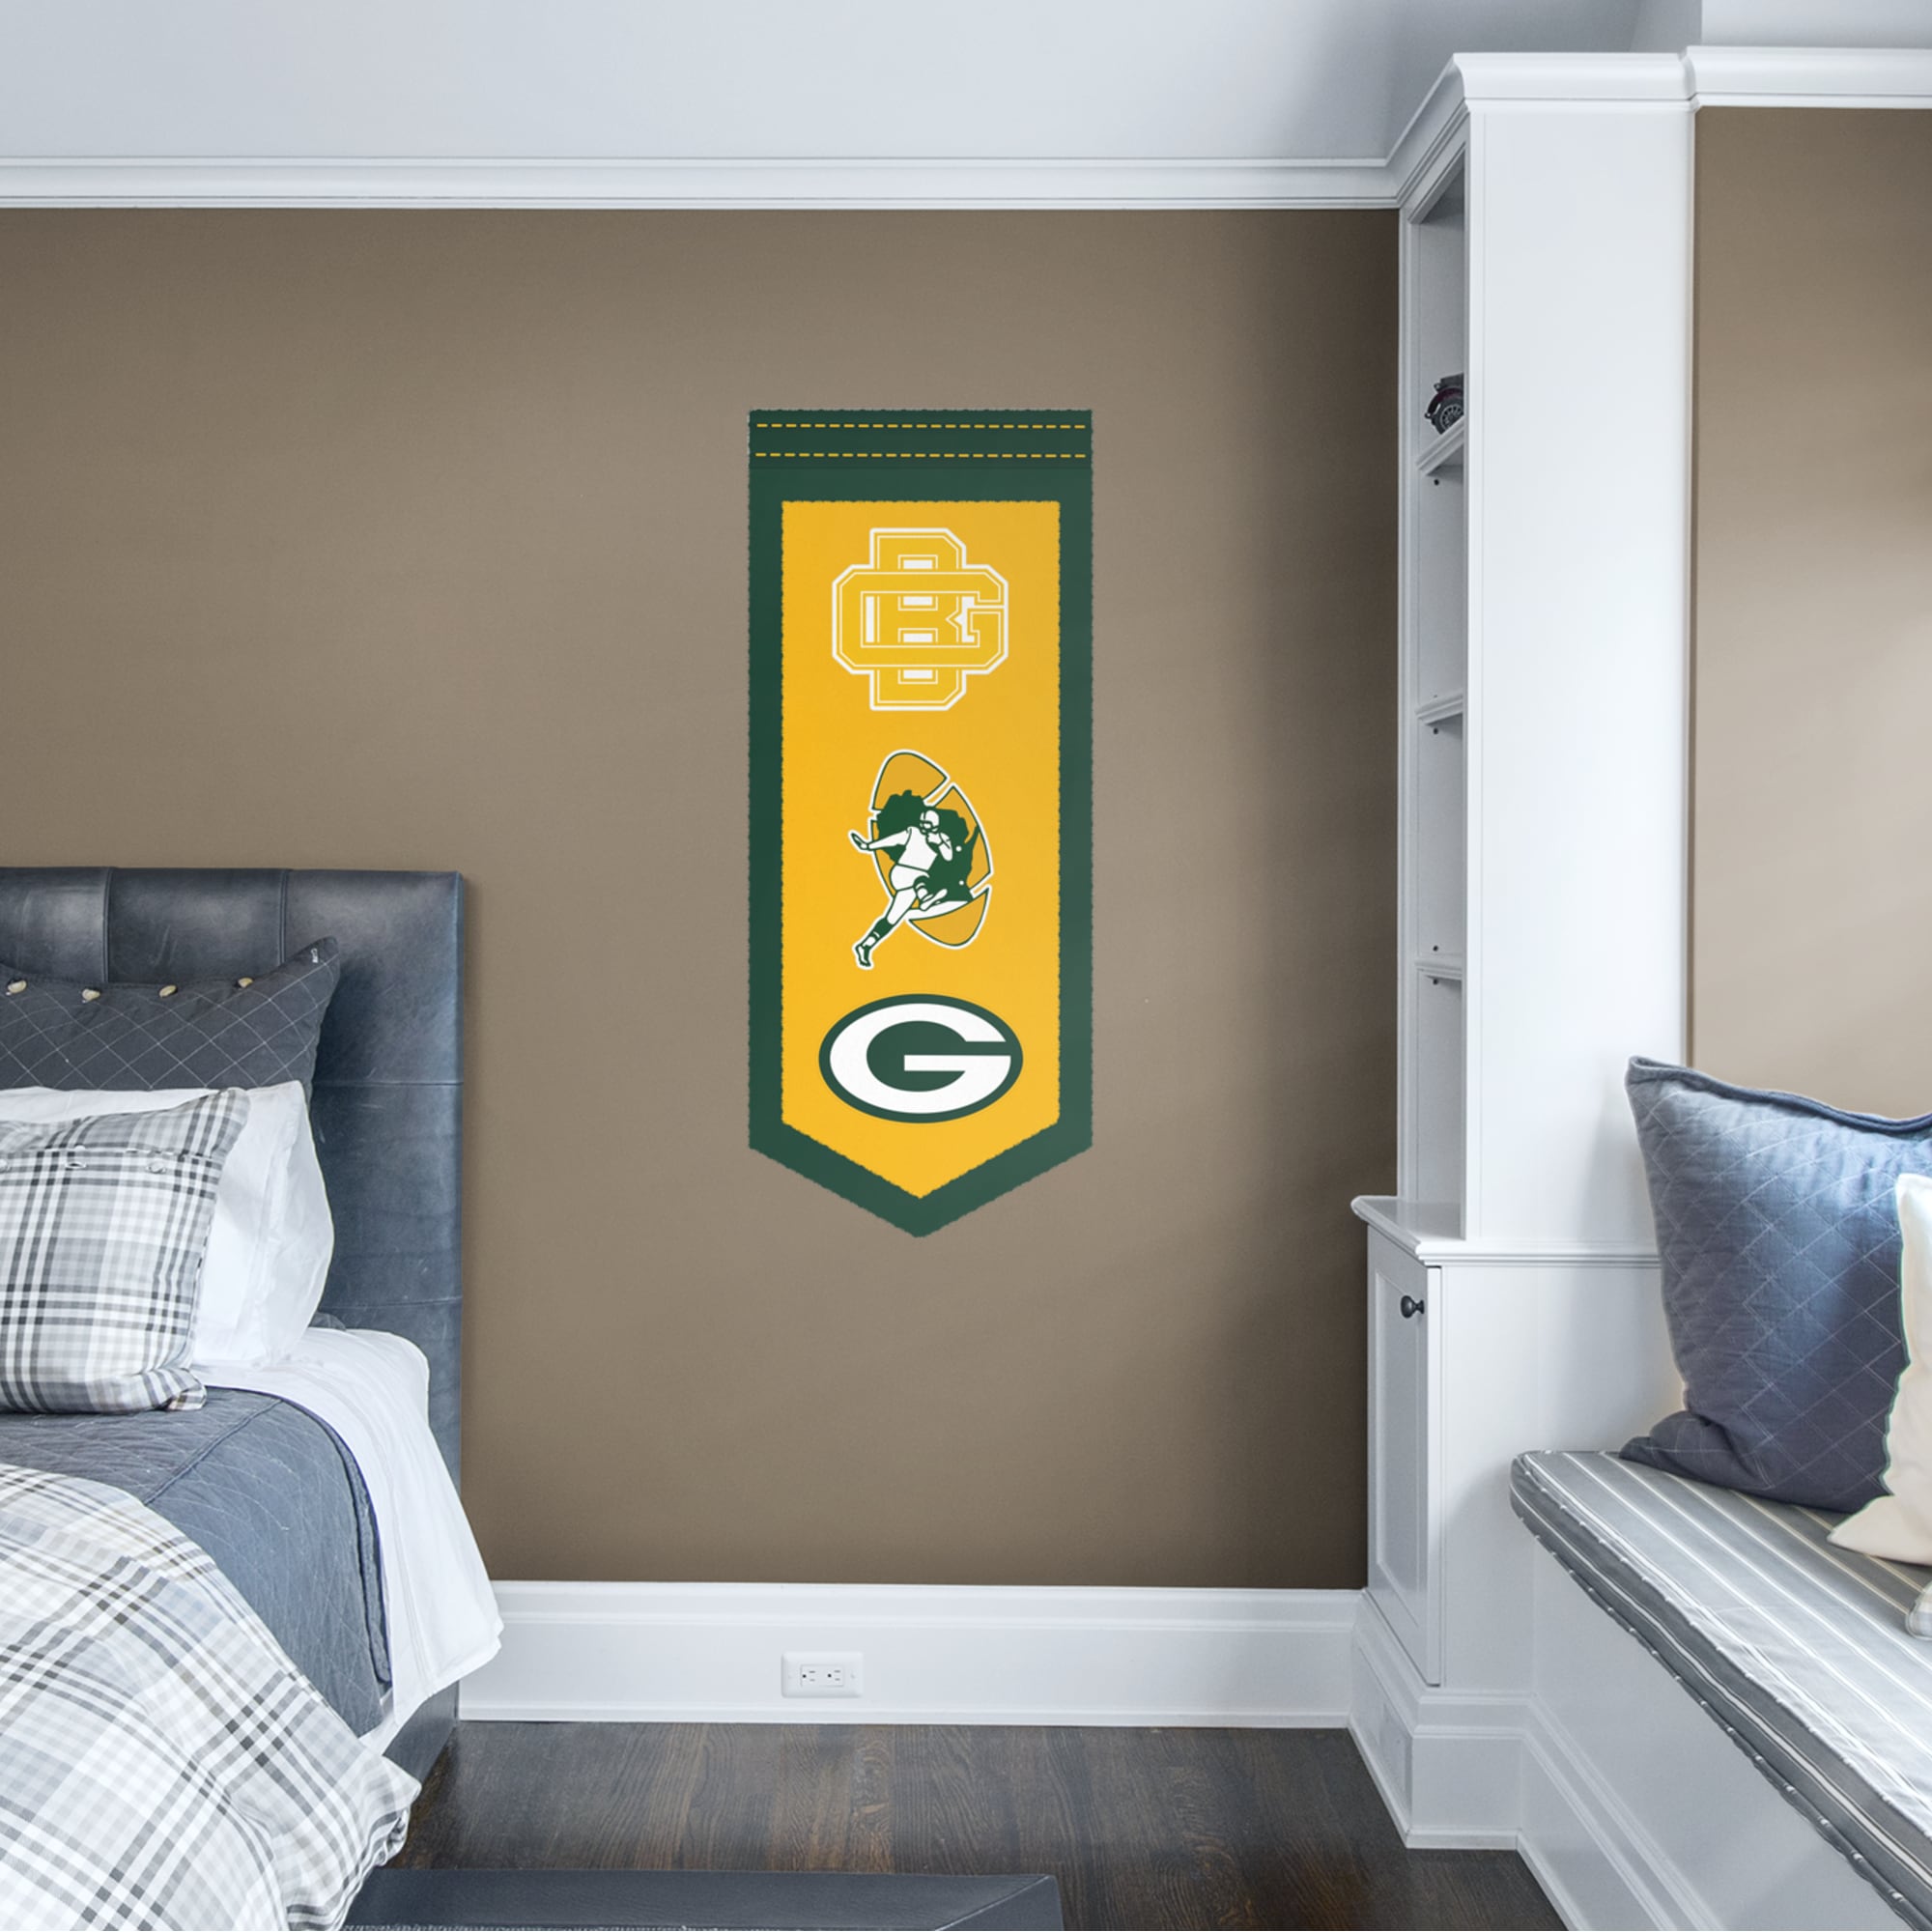 Green Bay Packers: Logo Evolution Banner - Officially Licensed NFL Removable Wall Decal 21.0"W x 51.0"H by Fathead | Vinyl